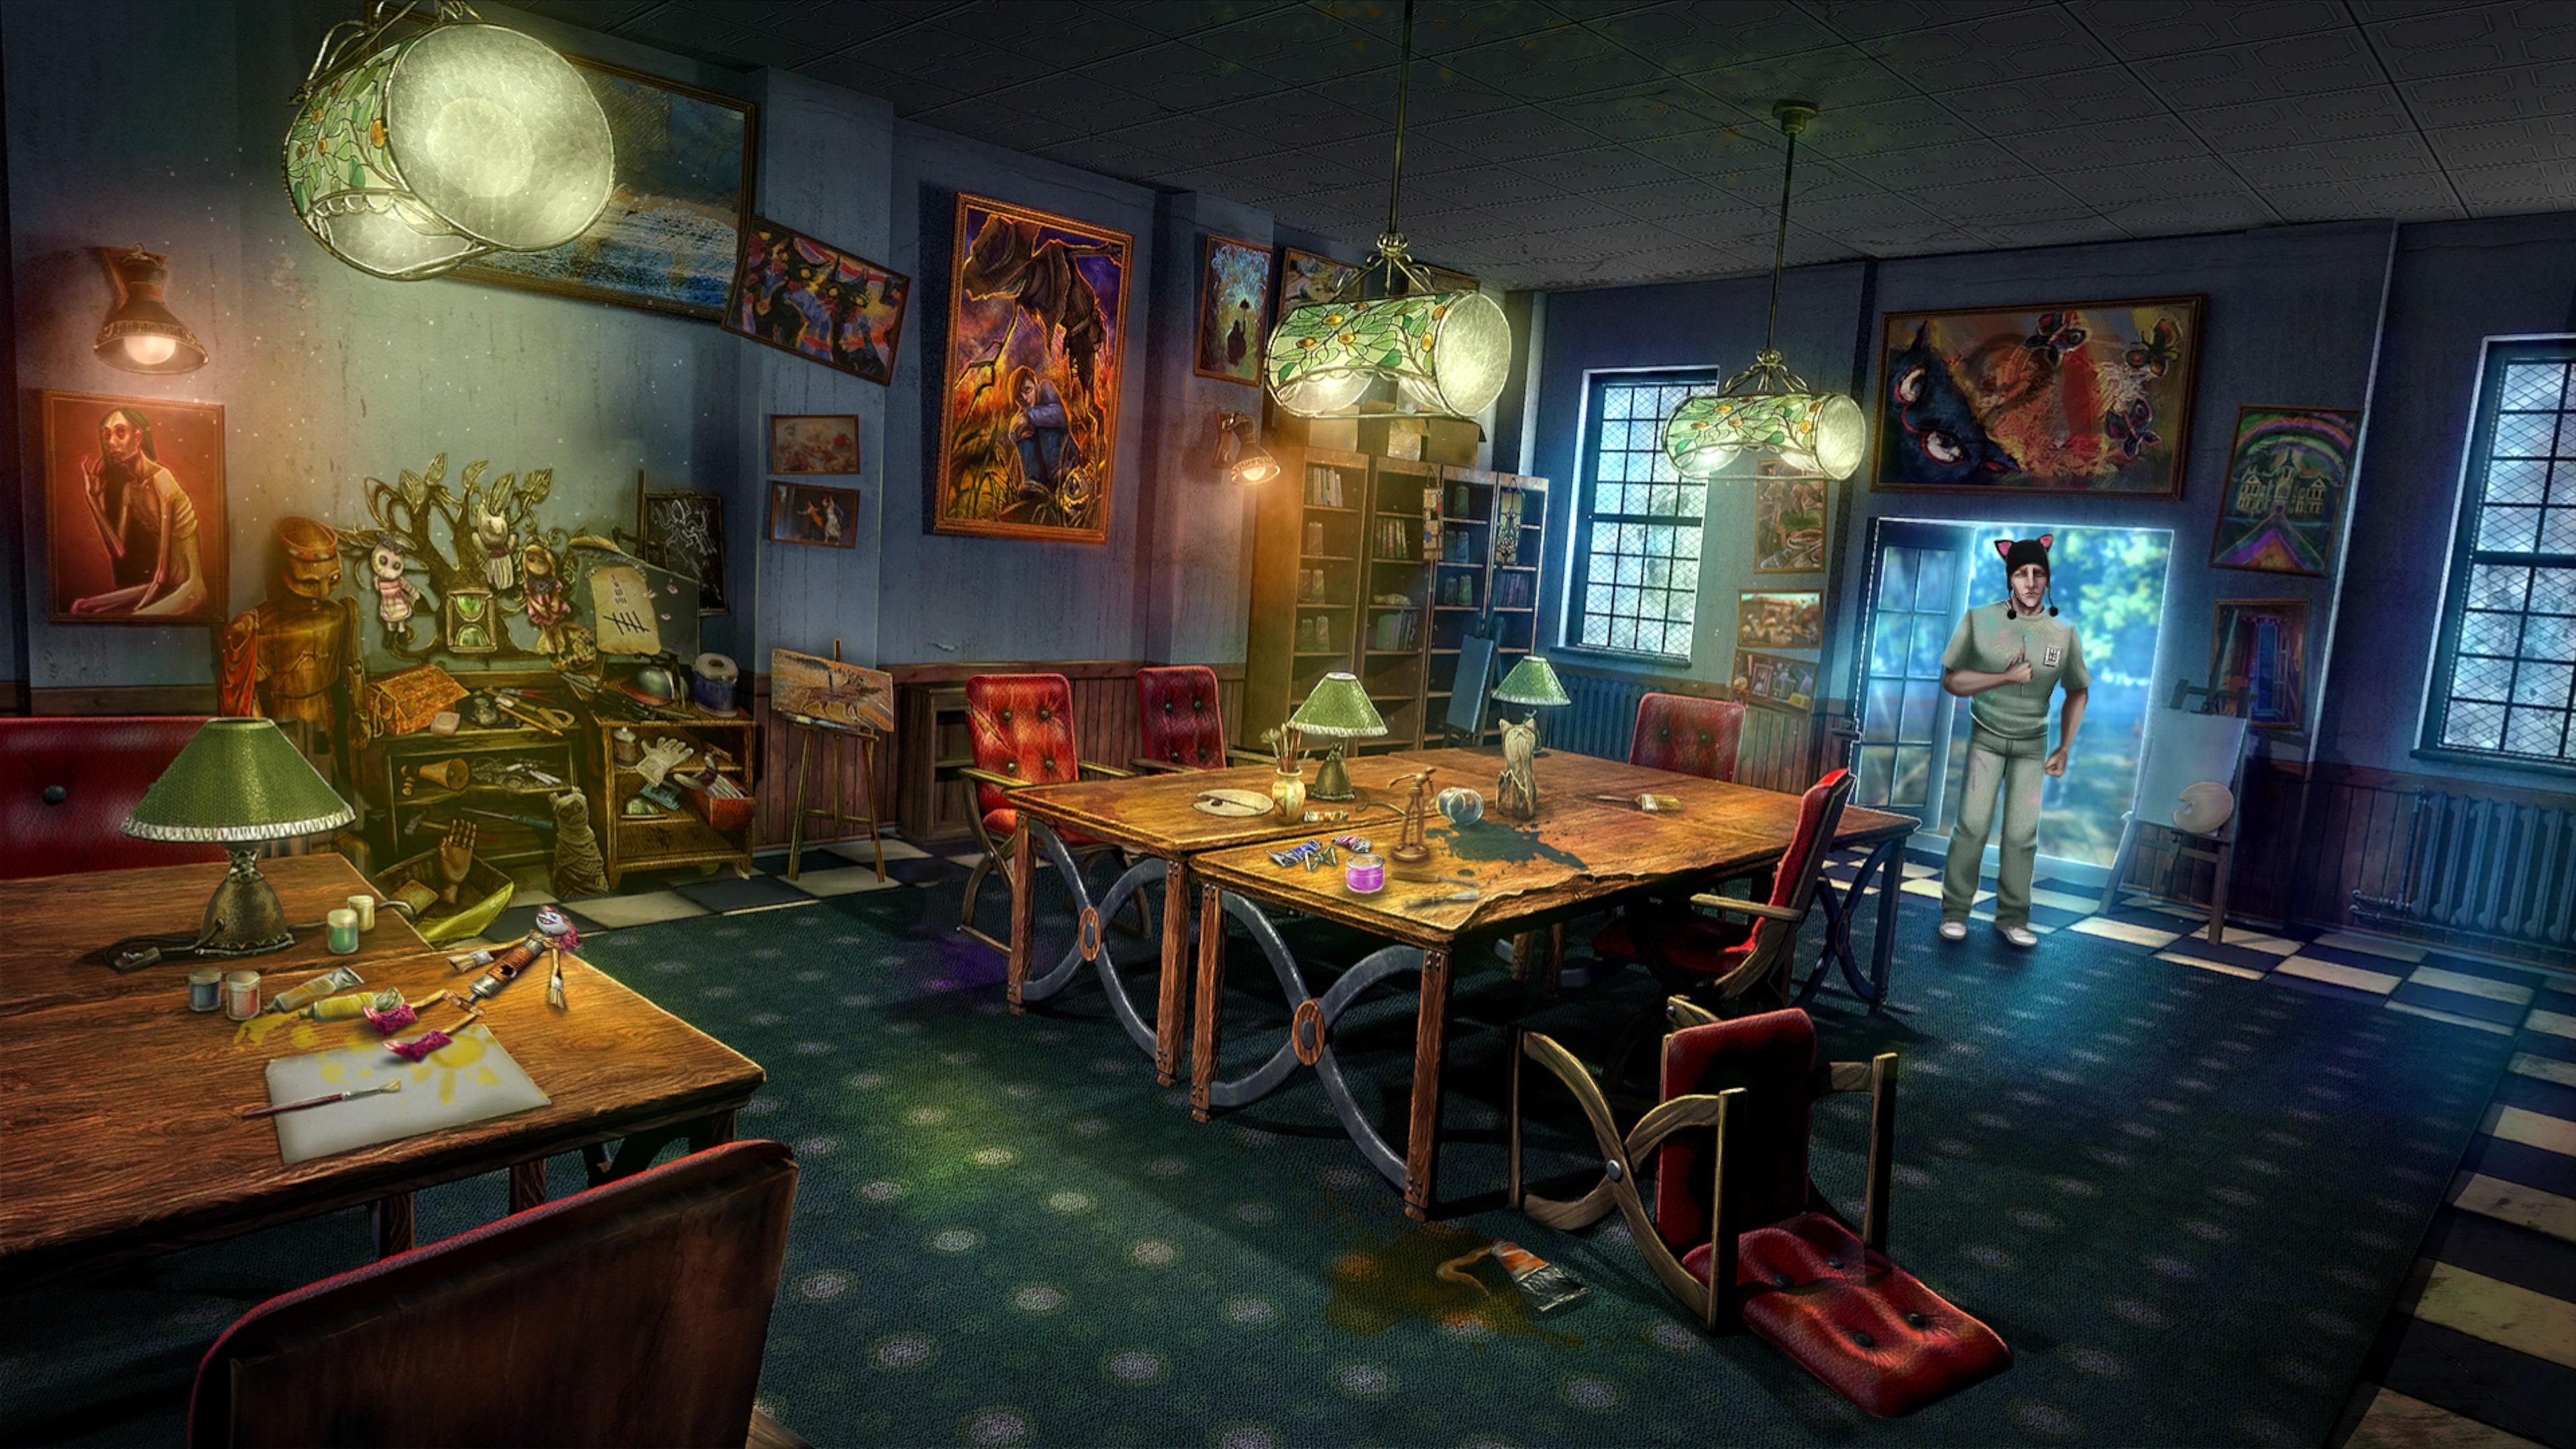 9-clues-2-the-ward-on-ps5-ps4-price-history-screenshots-discounts-canada